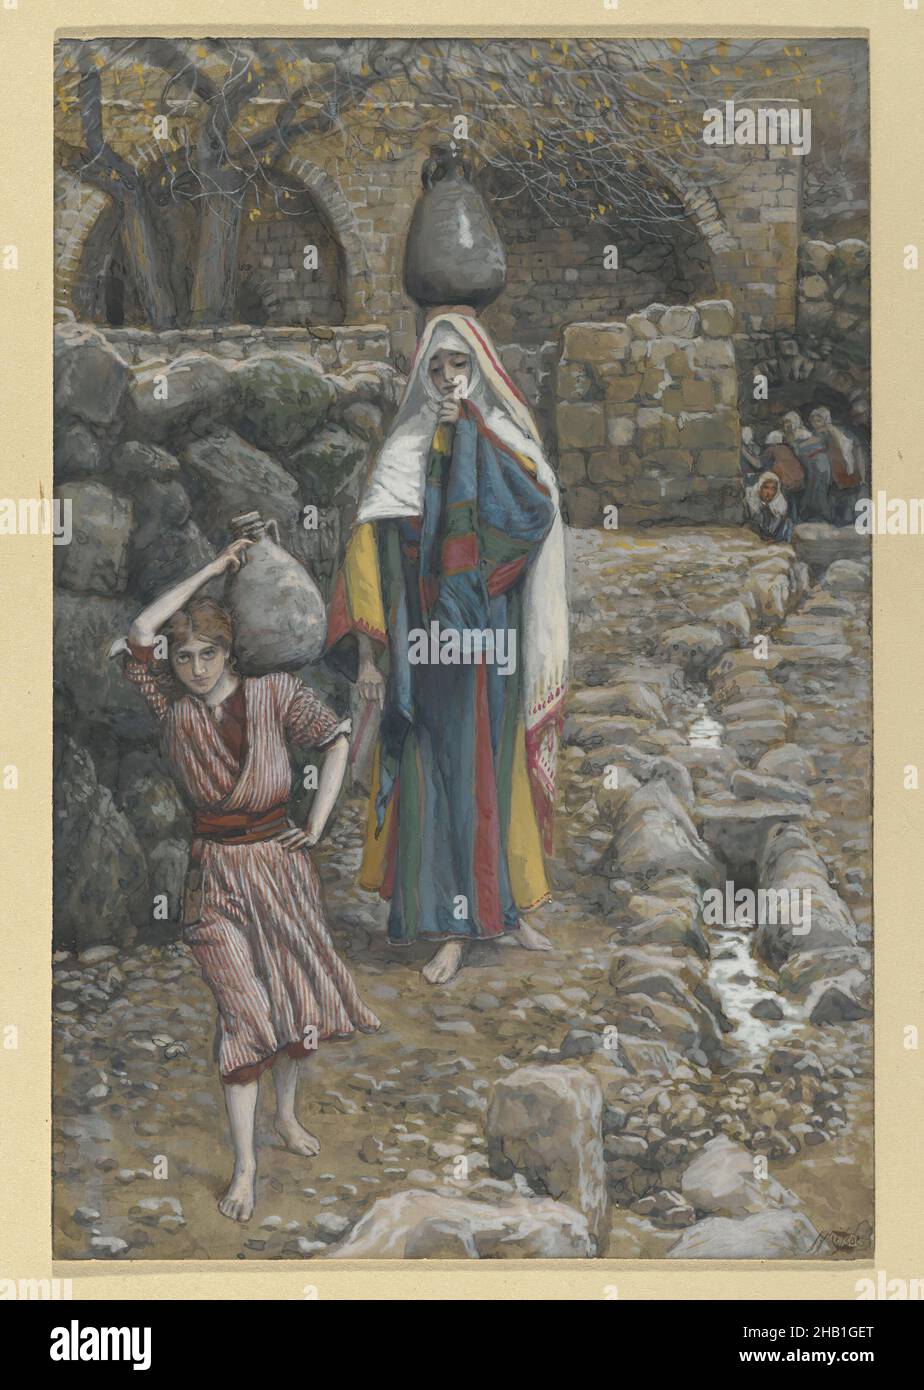 Jesus and his Mother at the Fountain, Jésus et sa mère à la fontaine, The Life of Our Lord Jesus Christ, La Vie de Notre-Seigneur Jésus-Christ, James Tissot, French, 1836-1902, Opaque watercolor over graphite on gray wove paper, France, 1886-1894, Image: 8 1/4 x 5 9/16 in., 21 x 14.1 cm, Bible, Biblical, Catholicism, Christ, Christianity, French, Jesus, labor, Luke 2:39-40, Madonna with Child, Mary, New Testament, Religion, Religious, religious art, rocks, Tissot, Virgin Mary, water, work, youth Stock Photo